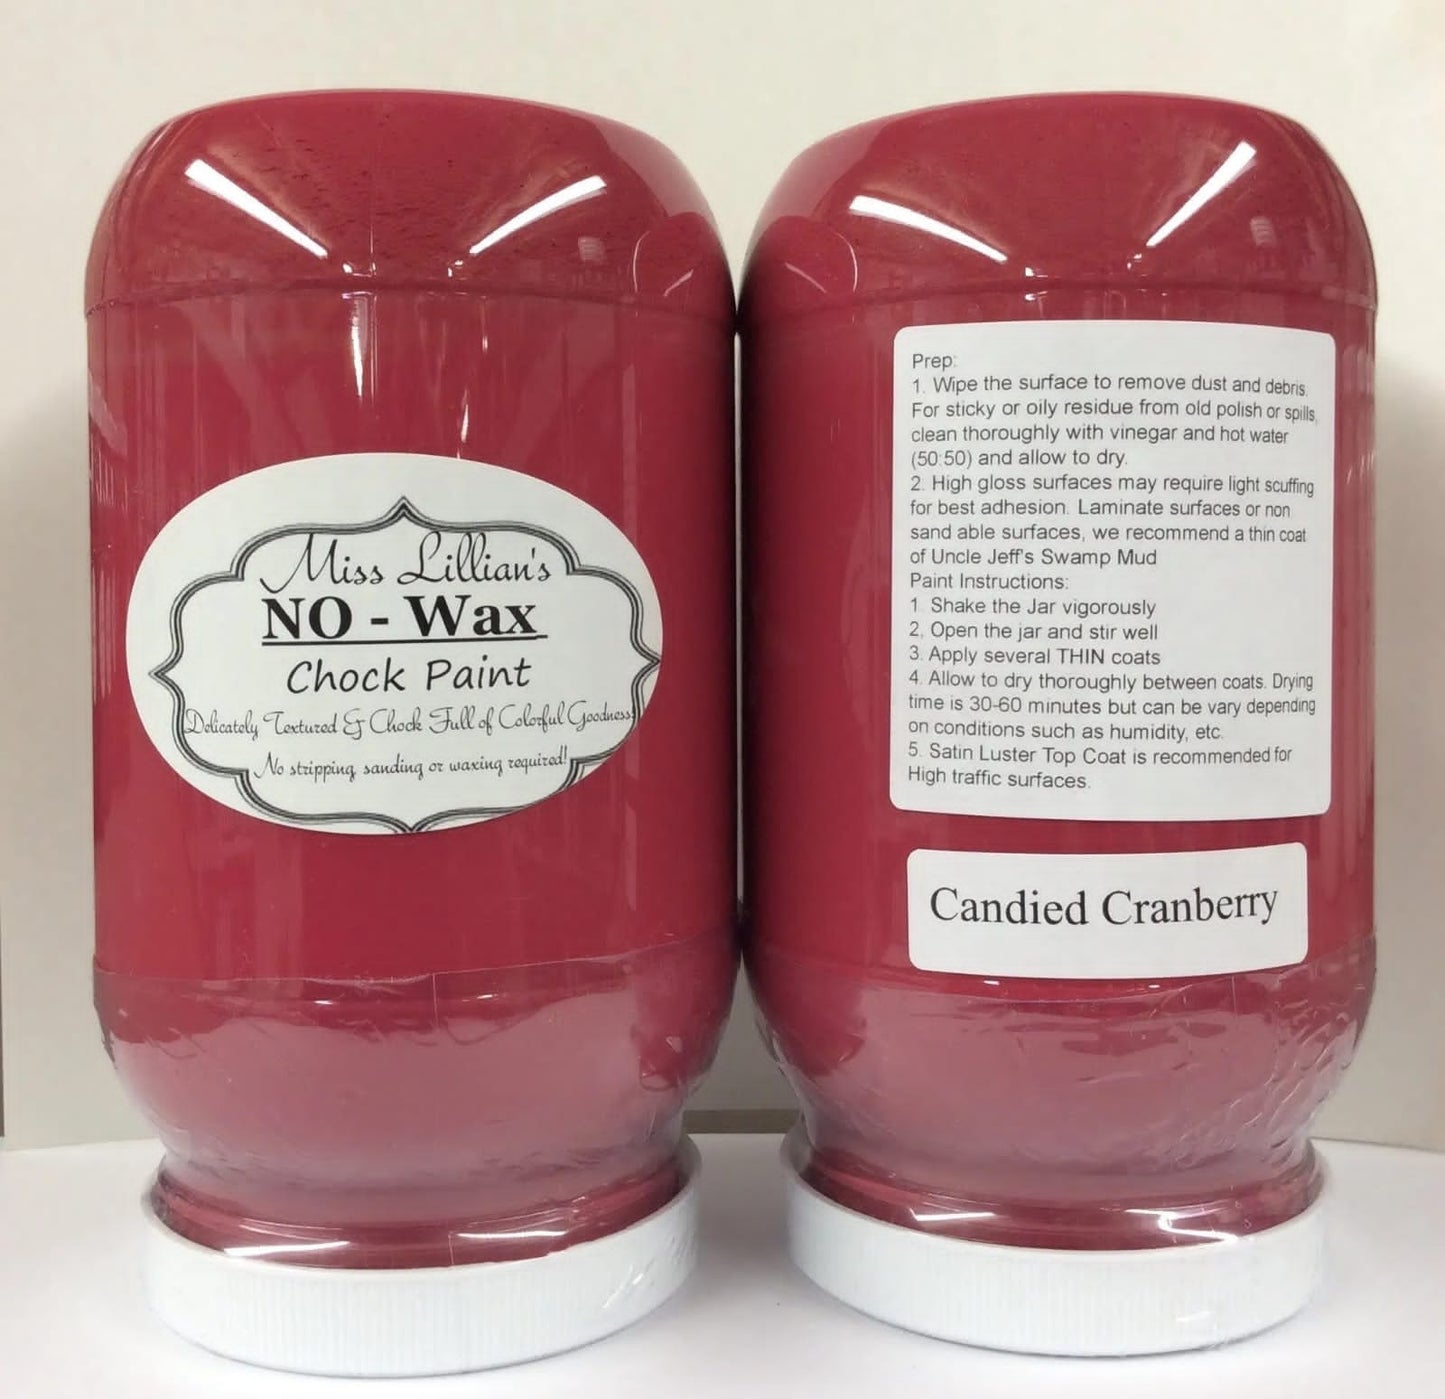 Miss Lillians Chock Paint Miss Lillians Chock Paint 8 OZ SAMPLE Miss Lillian's NO WAX Chock Paint - Candied Cranberry